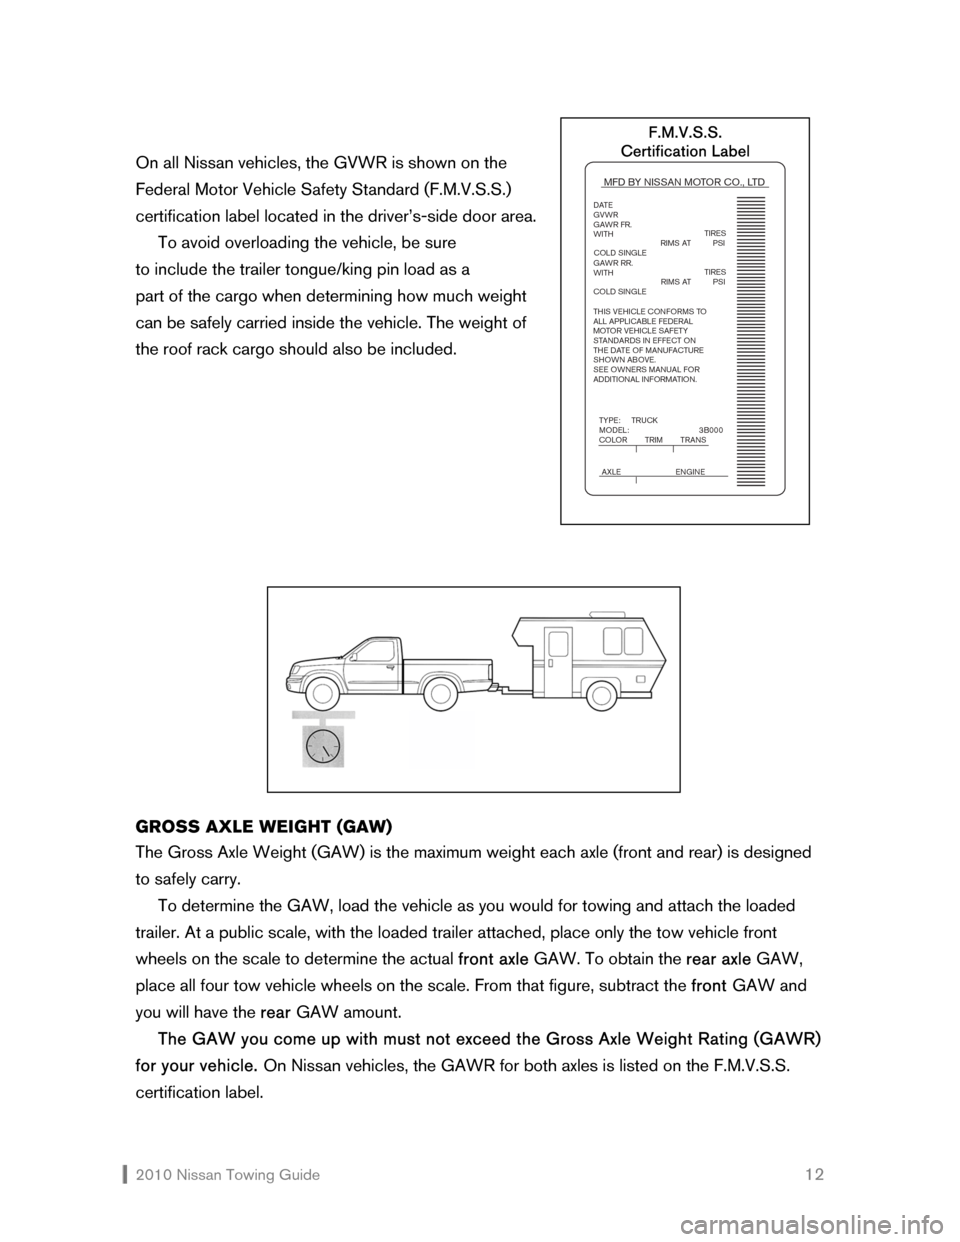 NISSAN CUBE 2010 3.G Towing Guide  2010 Nissan Towing Guide    12 On all Nissan vehicles, the GVWR is shown on the  
Federal Motor Vehicle Safety Standard (F.M.V.S.S.) 
certification label located in the driver’s-side door area.  
 